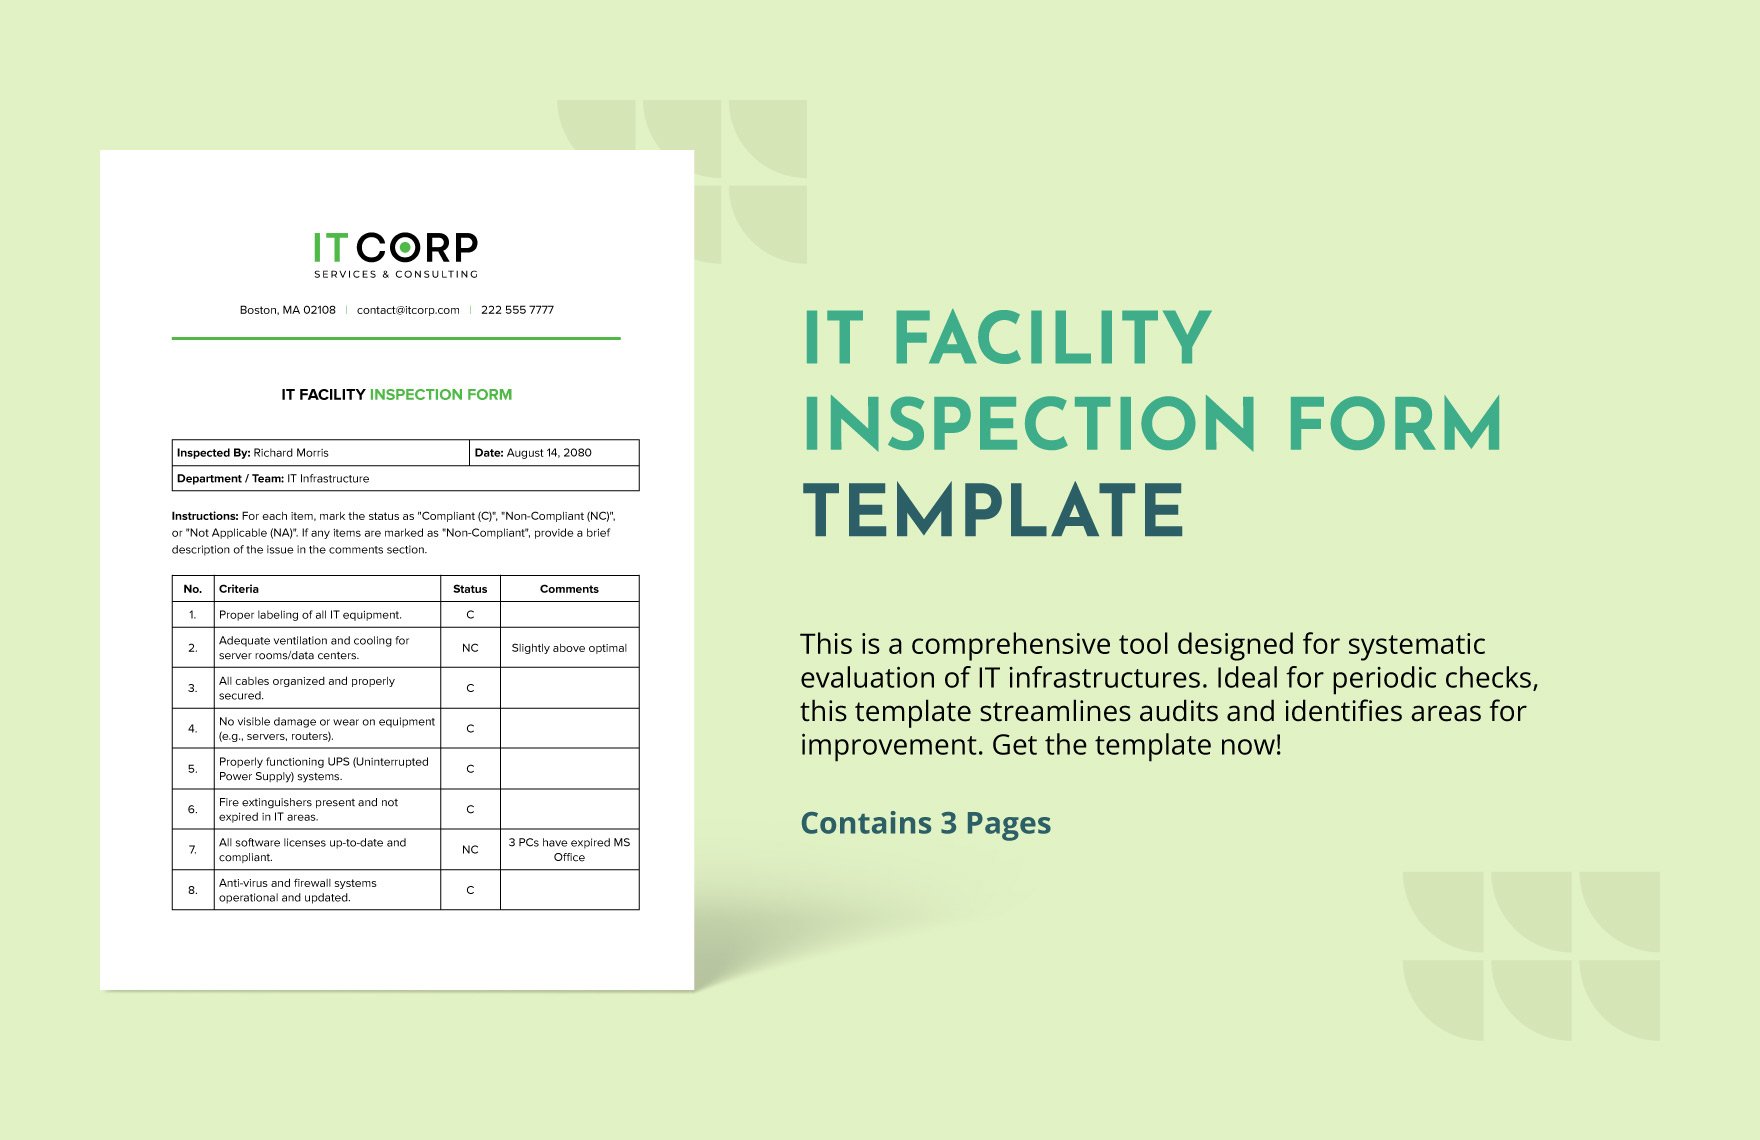 IT Facility Inspection Form Template in Word, Google Docs, PDF